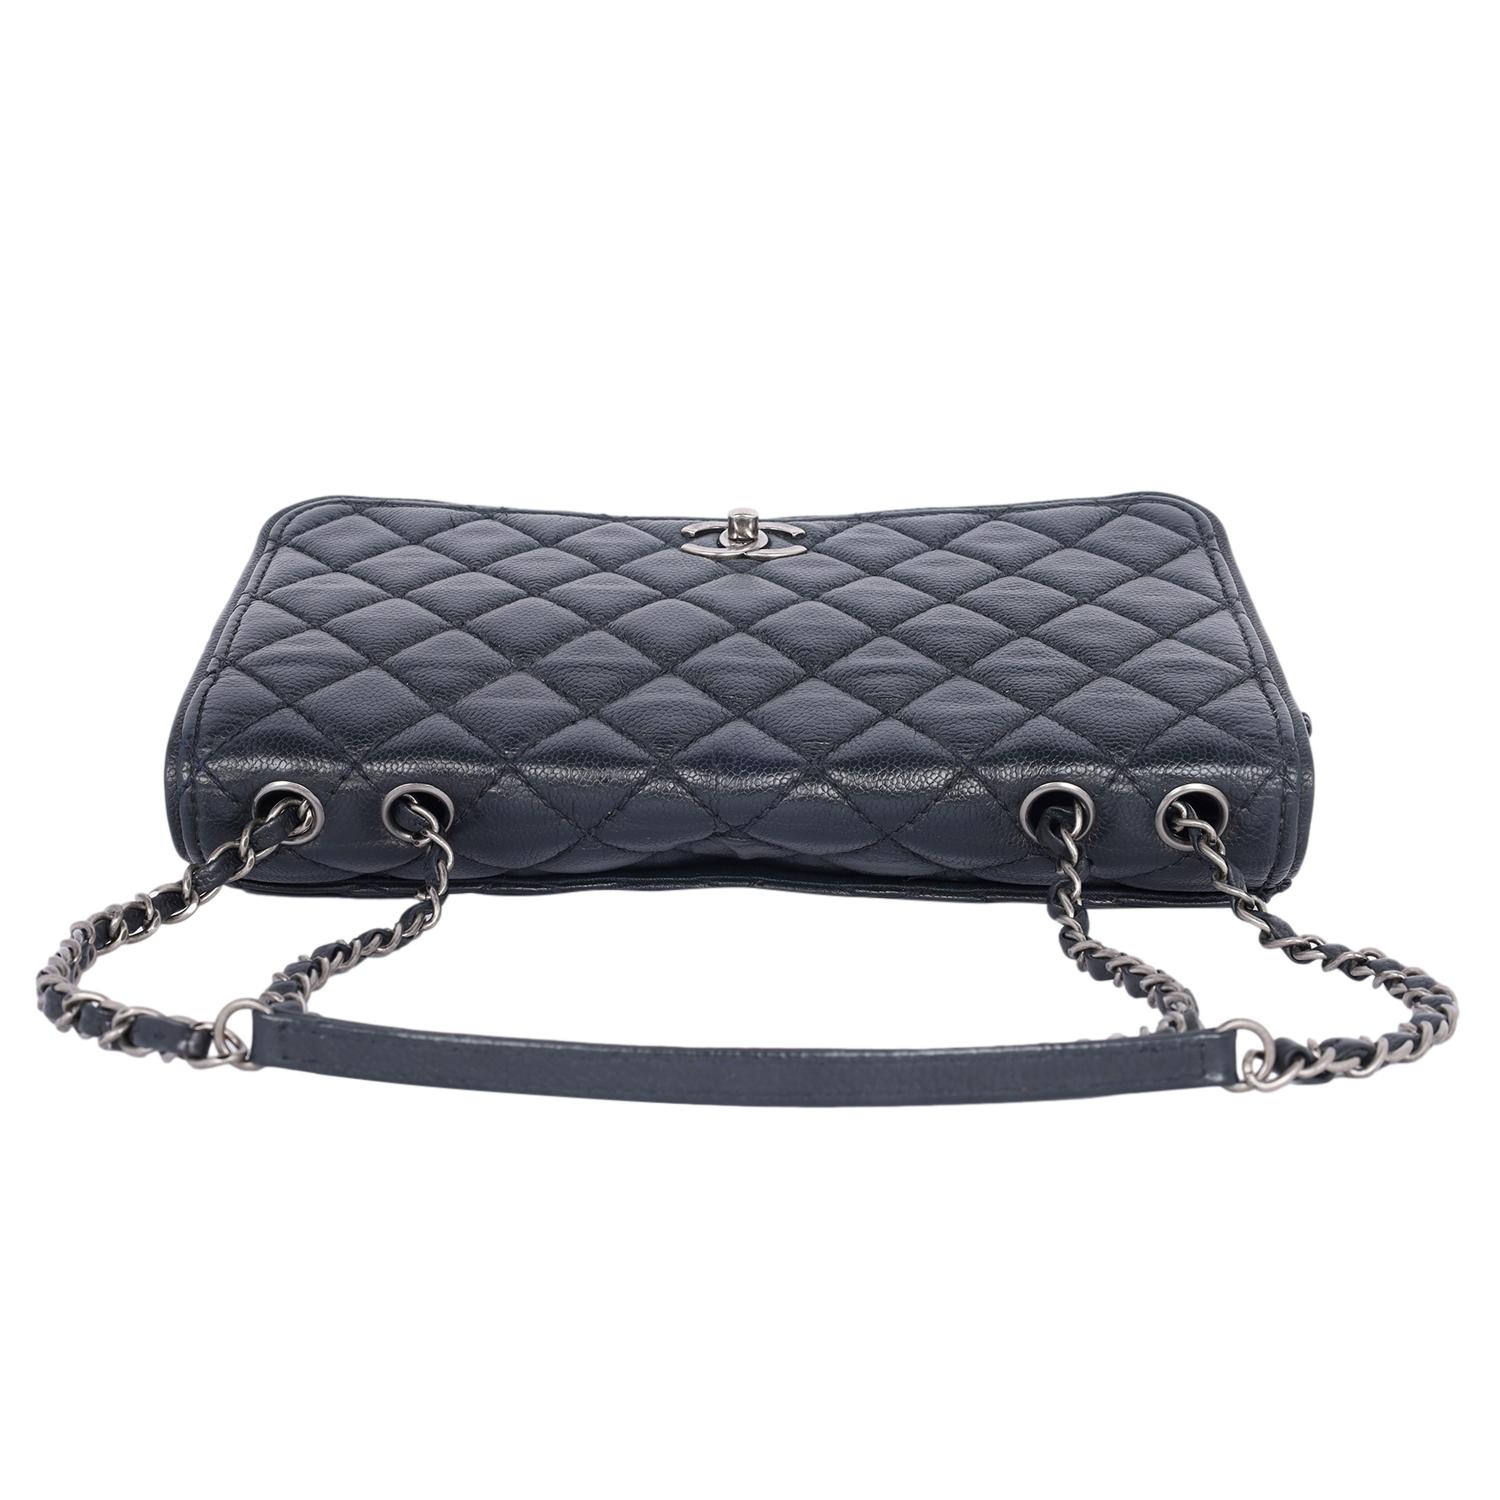 Chanel Quilted Matelasse CC Logo Caviar Leather For Sale 4